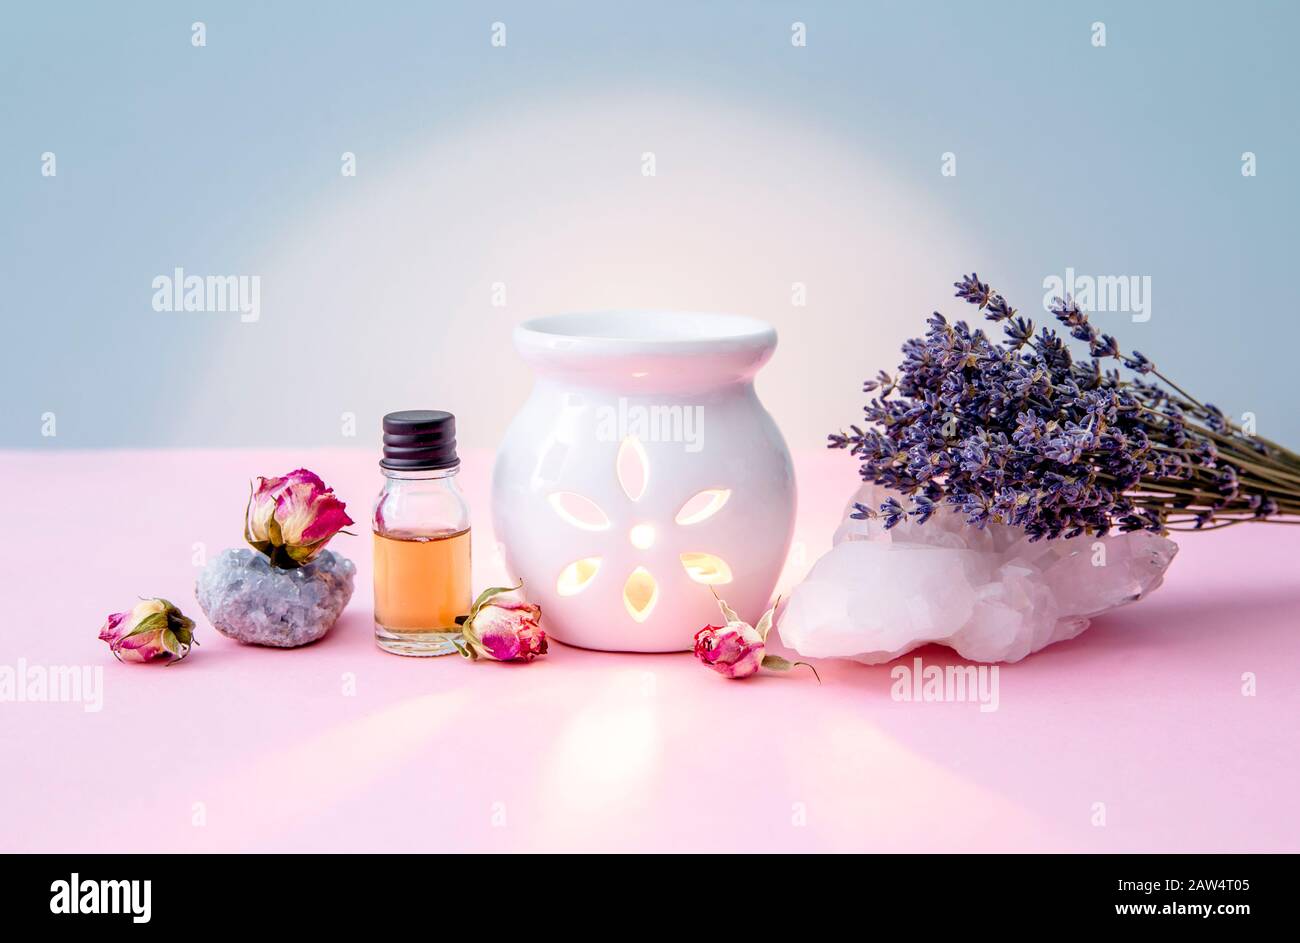 White ceramic candle aroma oil lamp with essential oil bottle and dried flowers, crystal geodes on modern pastel pink and blue background indoors. Stock Photo